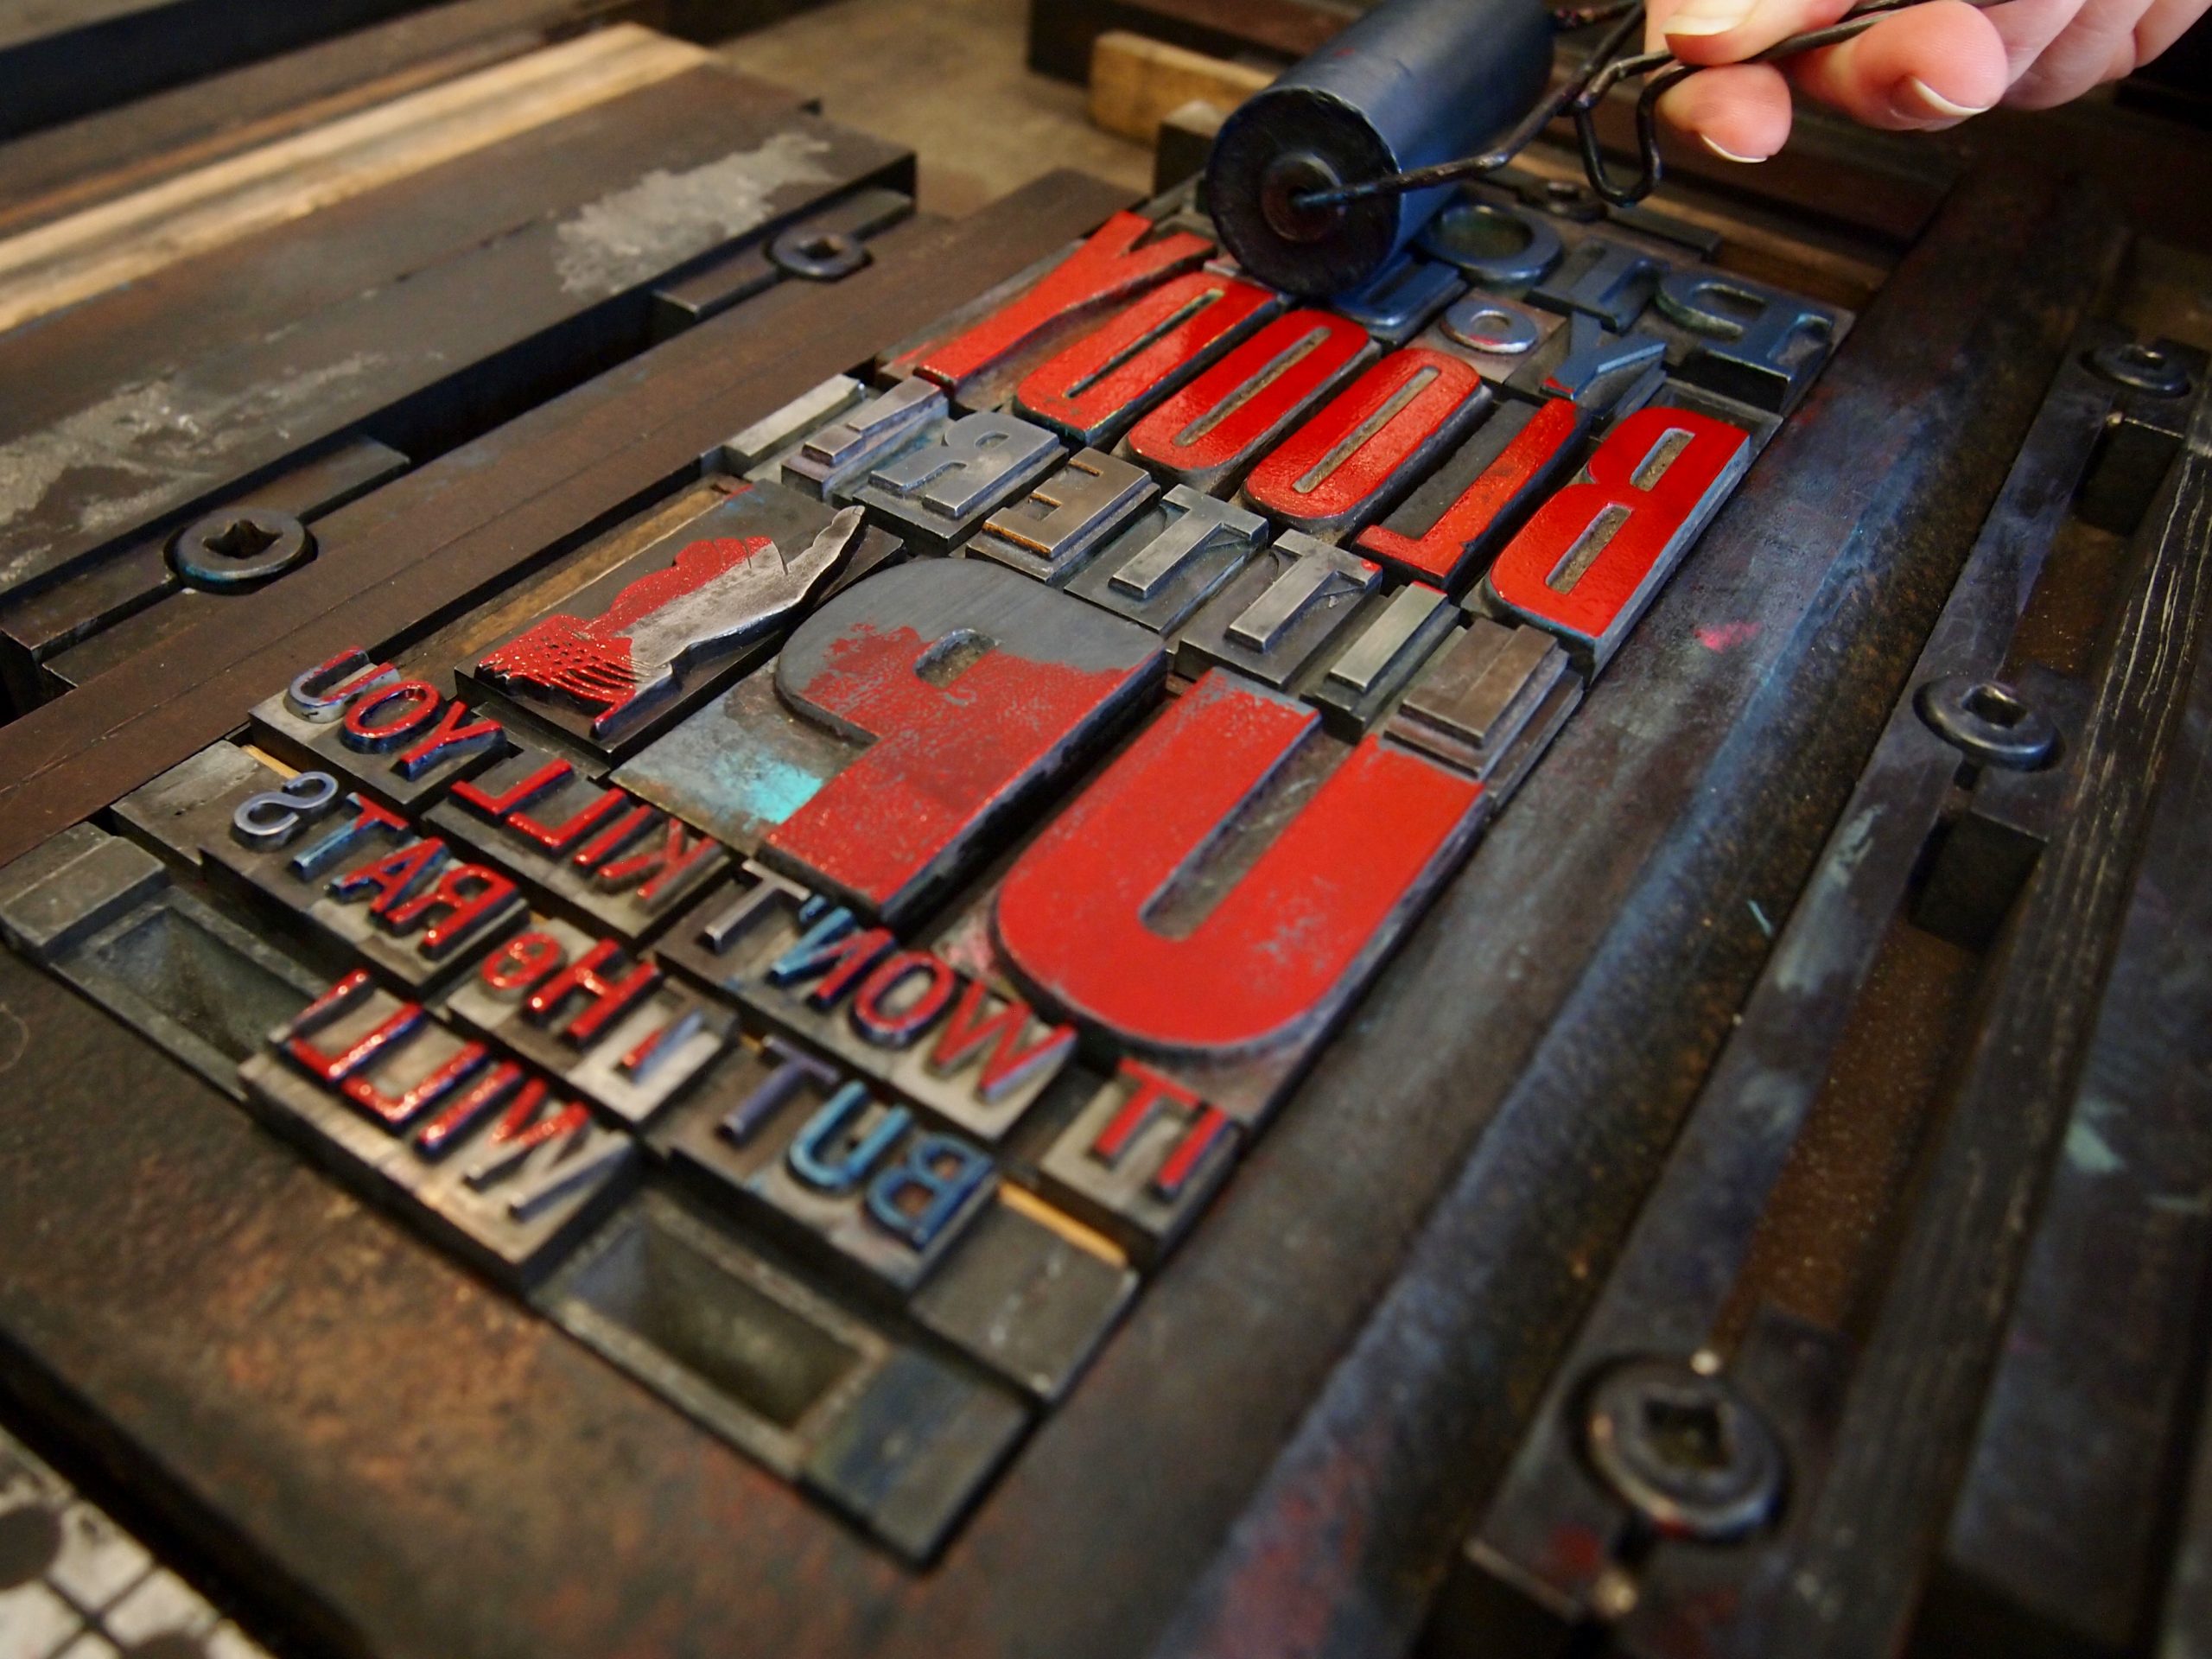 Print a Letterpress Poster: Inking Up